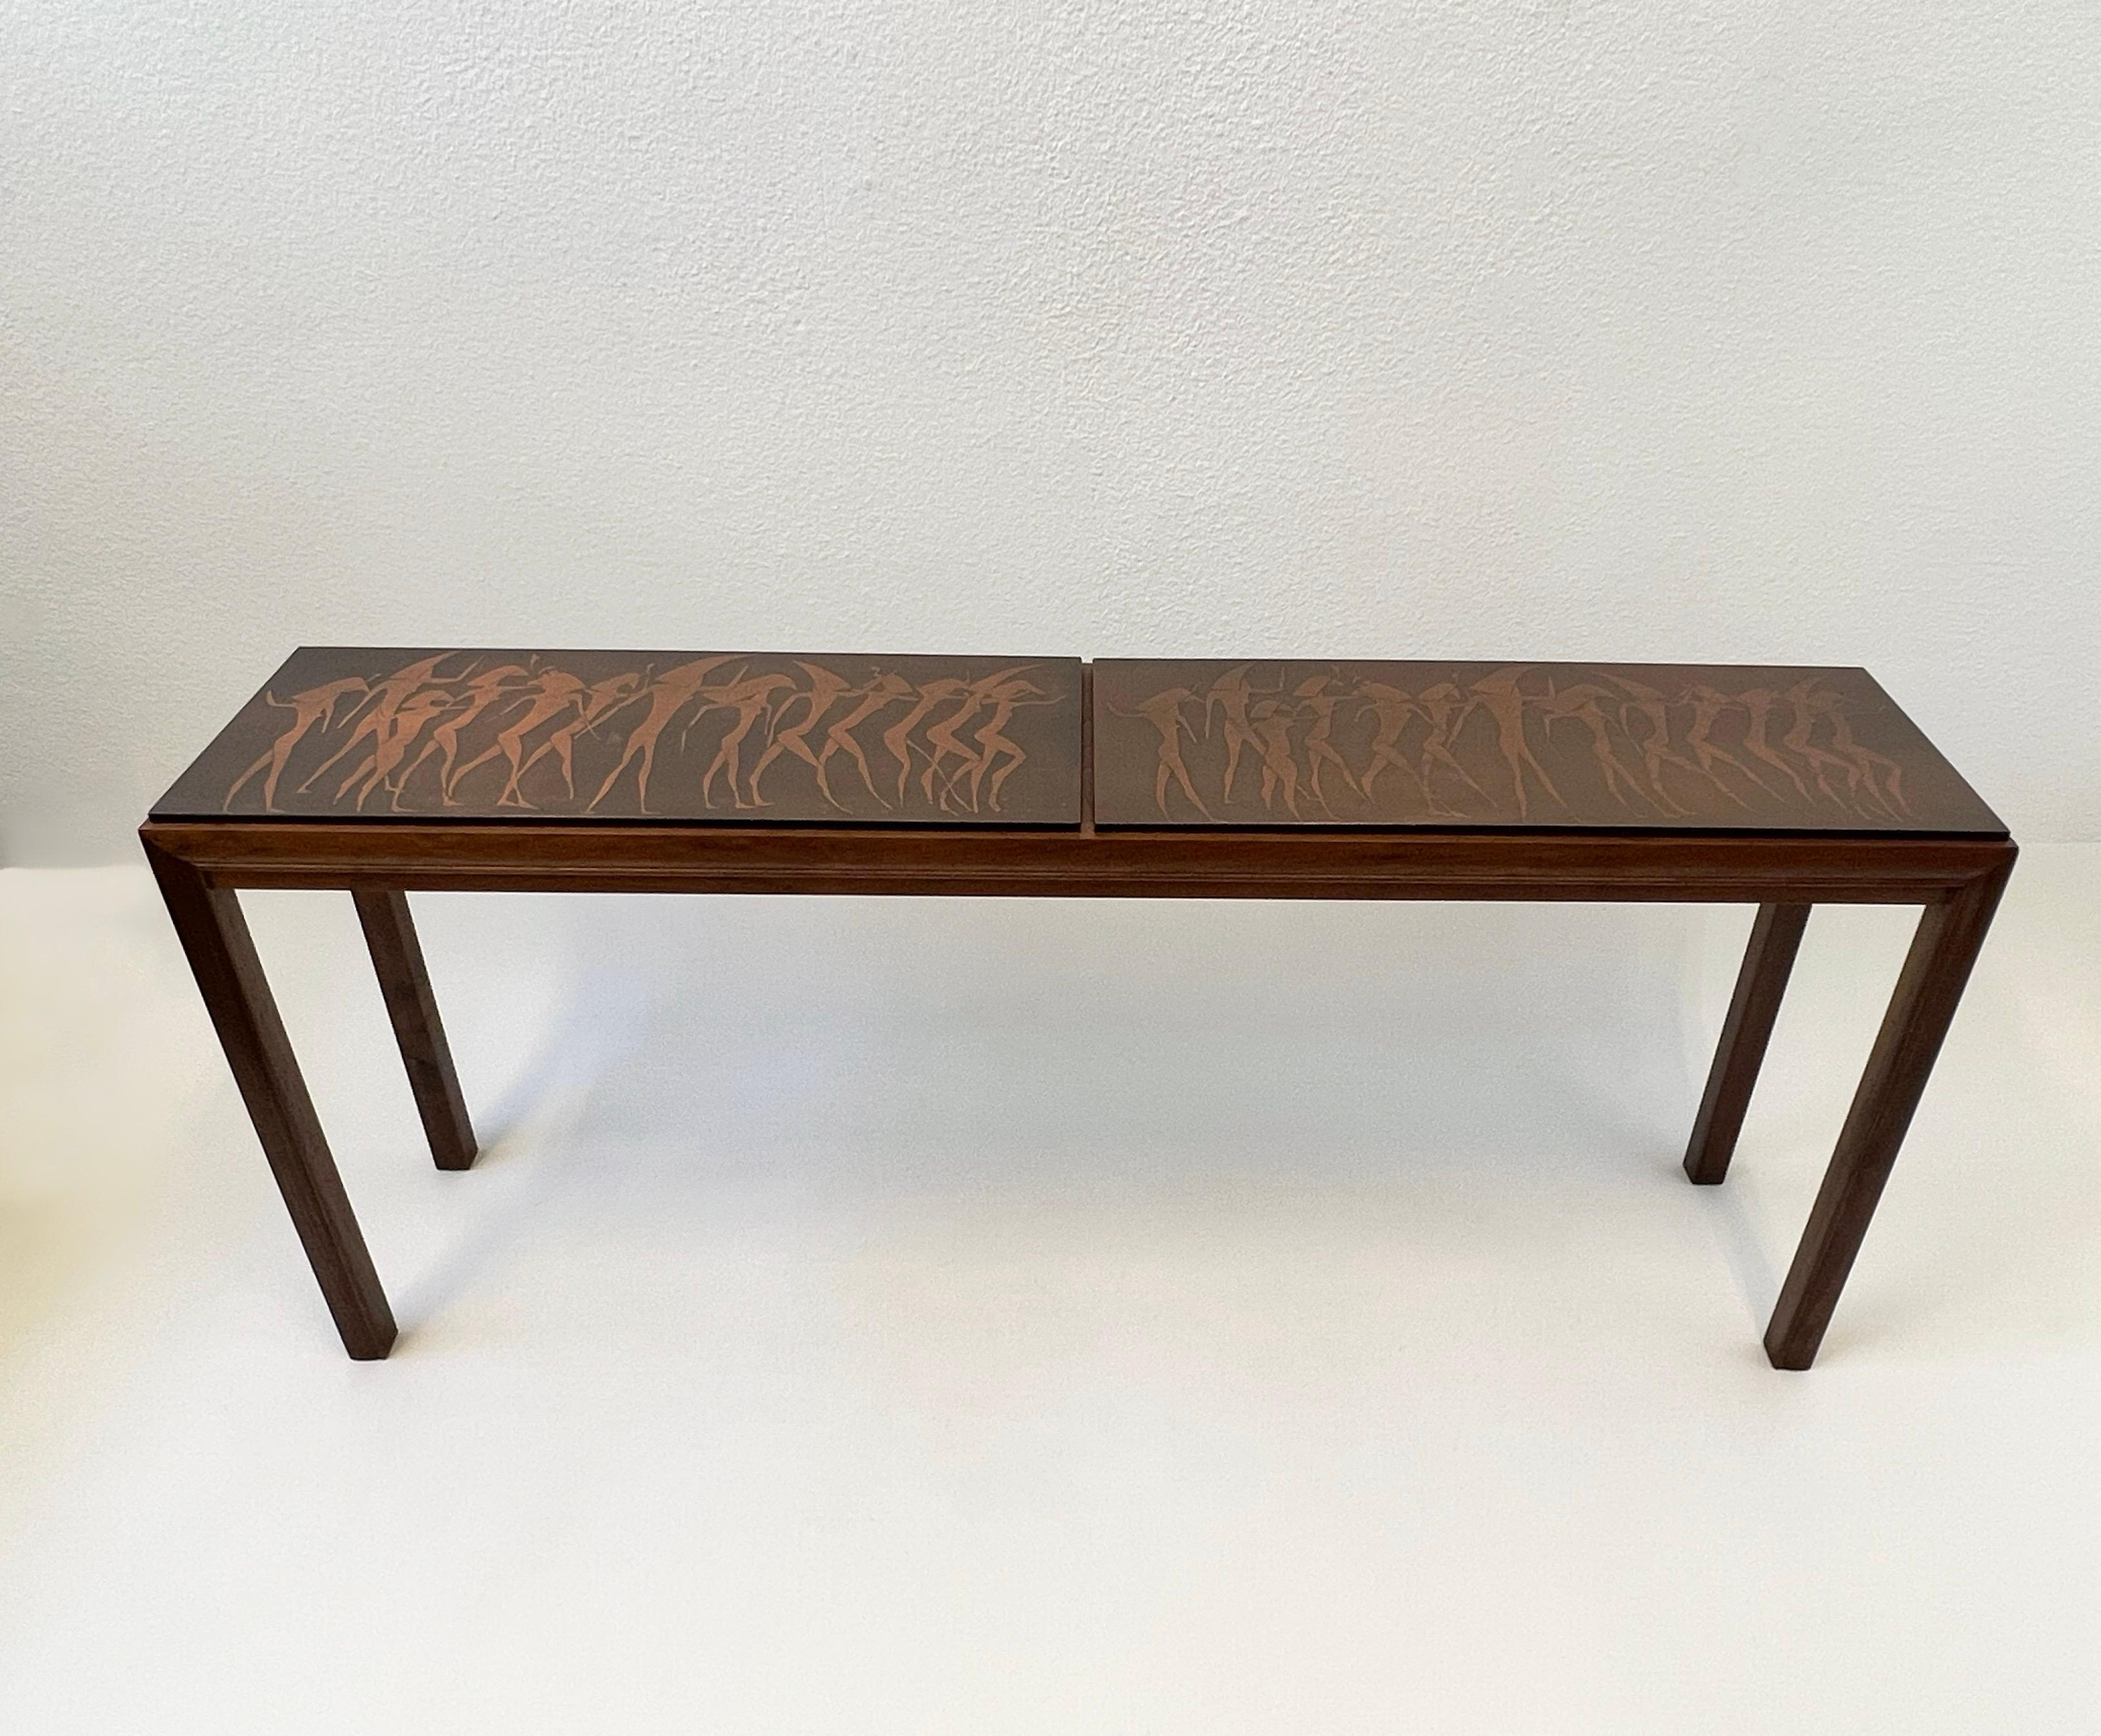 Late 20th Century Italian Brutalist Walnut and Copper Console Table by G. Urso For Sale